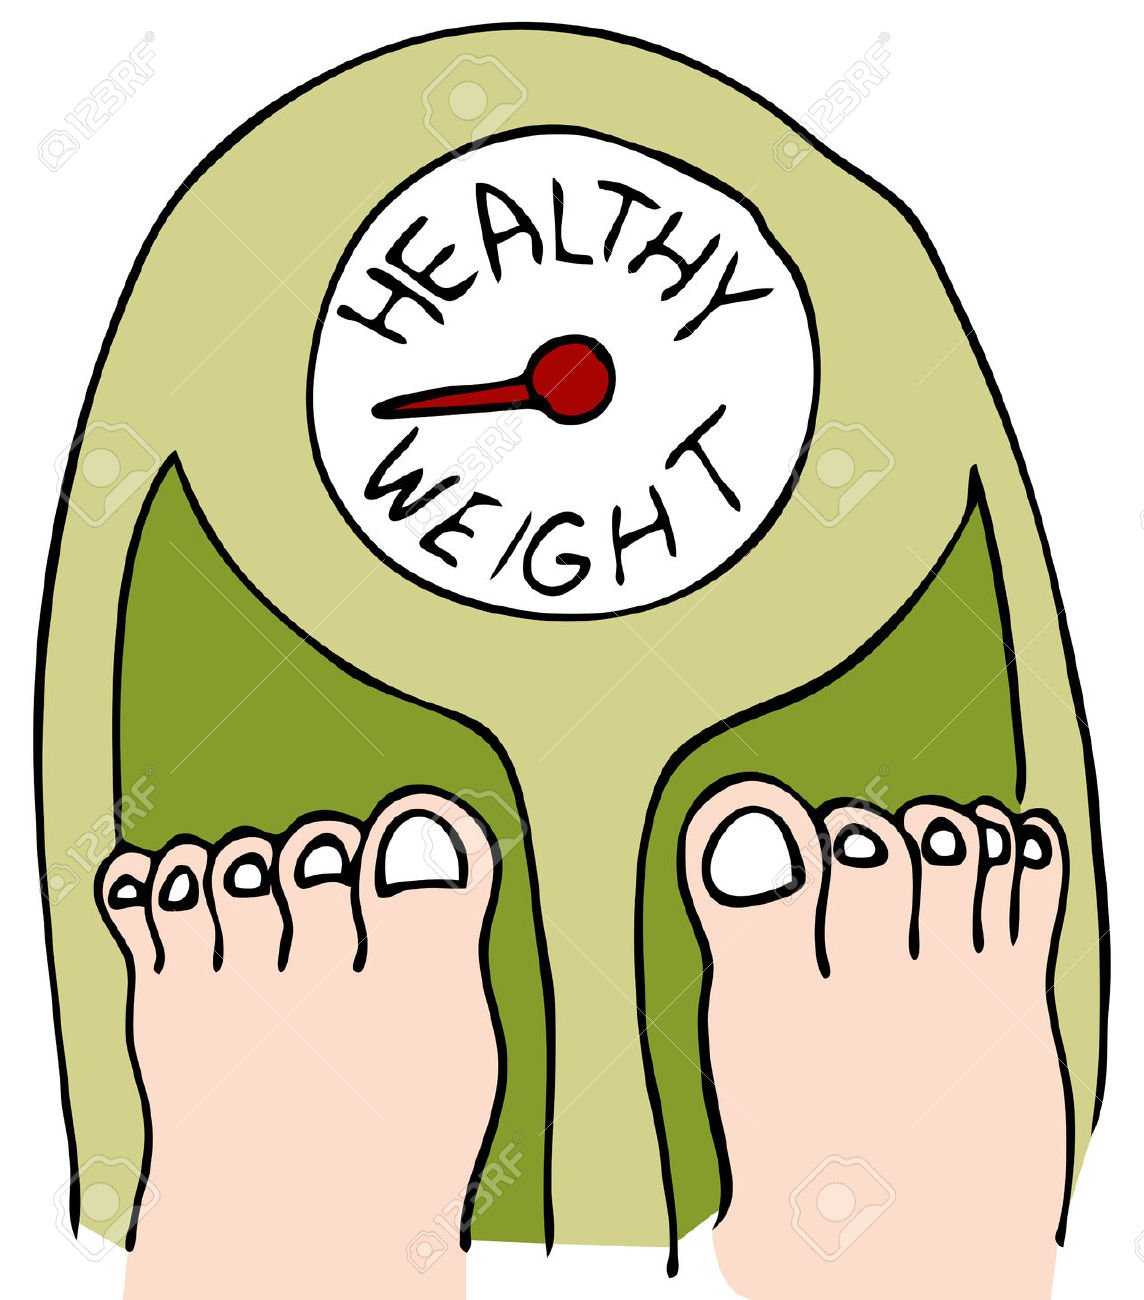 Healthy . Weight clipart body weight